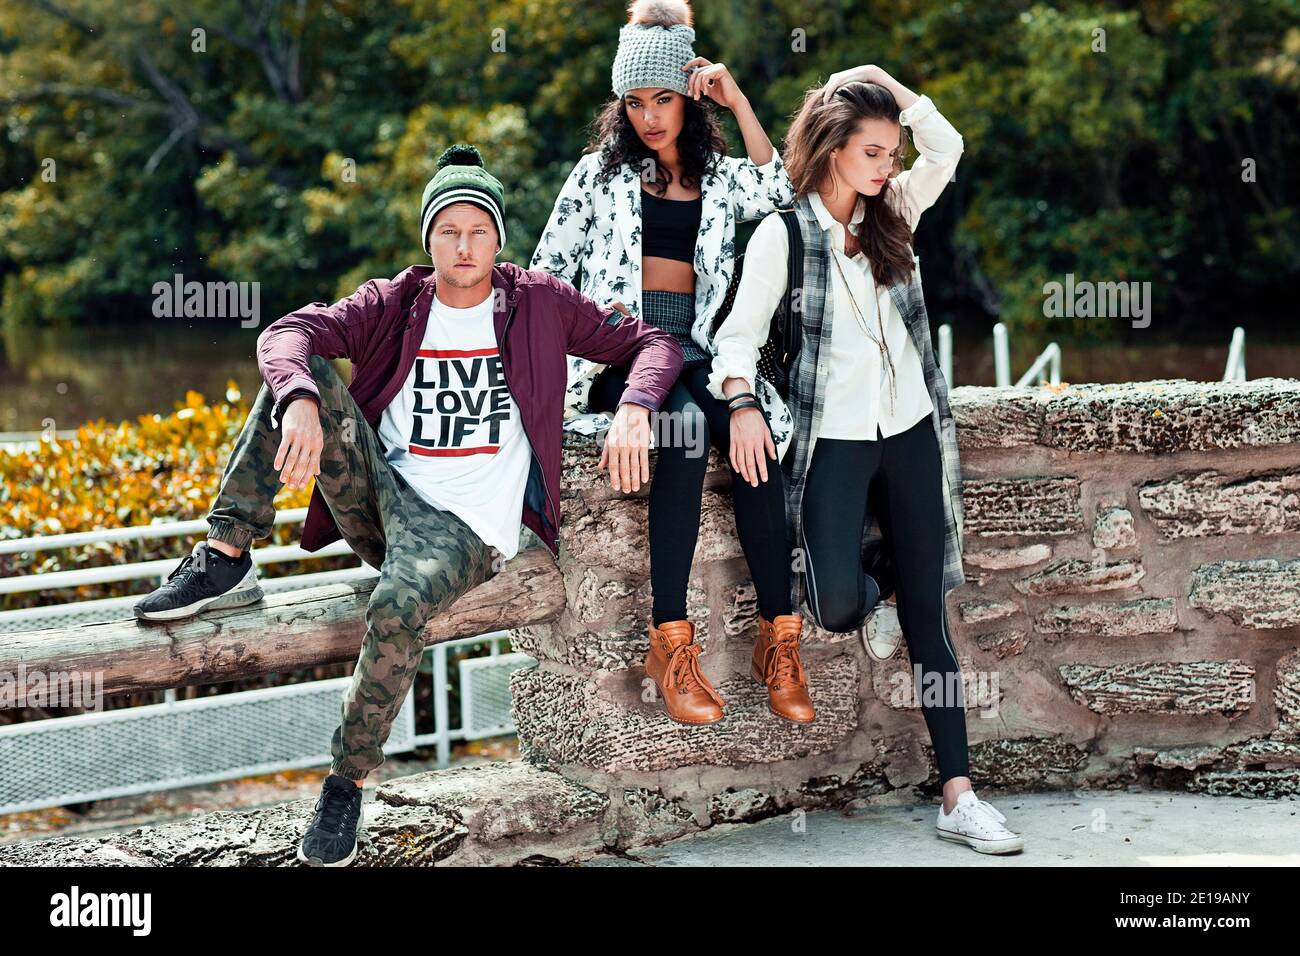 Portrait of 3 young adults sitting on a tree log in front of a lake at a natural park during a sunny day in the spring wearing cool urban outfits. Stock Photo